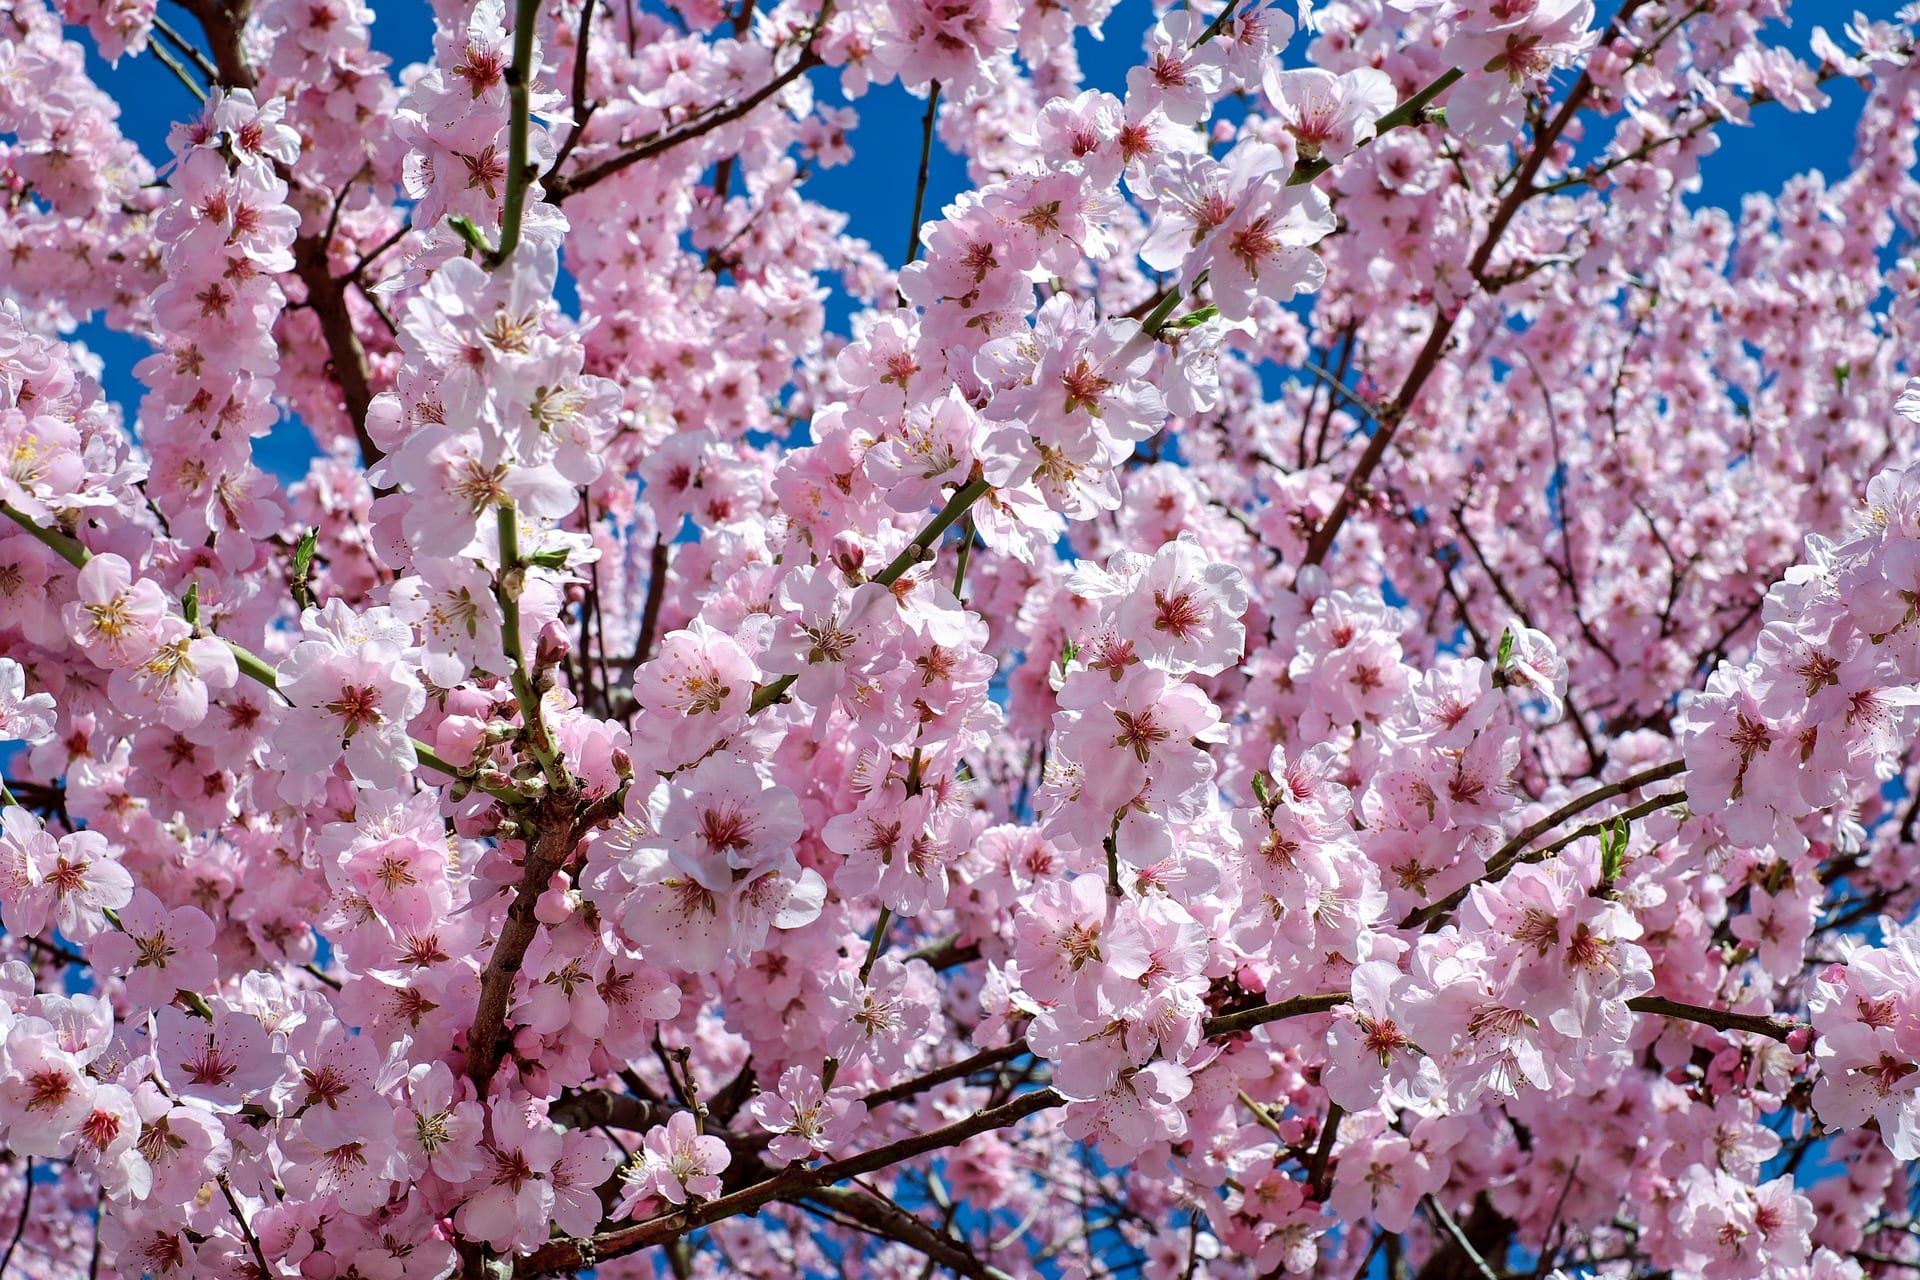 Springtime Flowers & Cultural Illuminations The 14th Annual Cherry